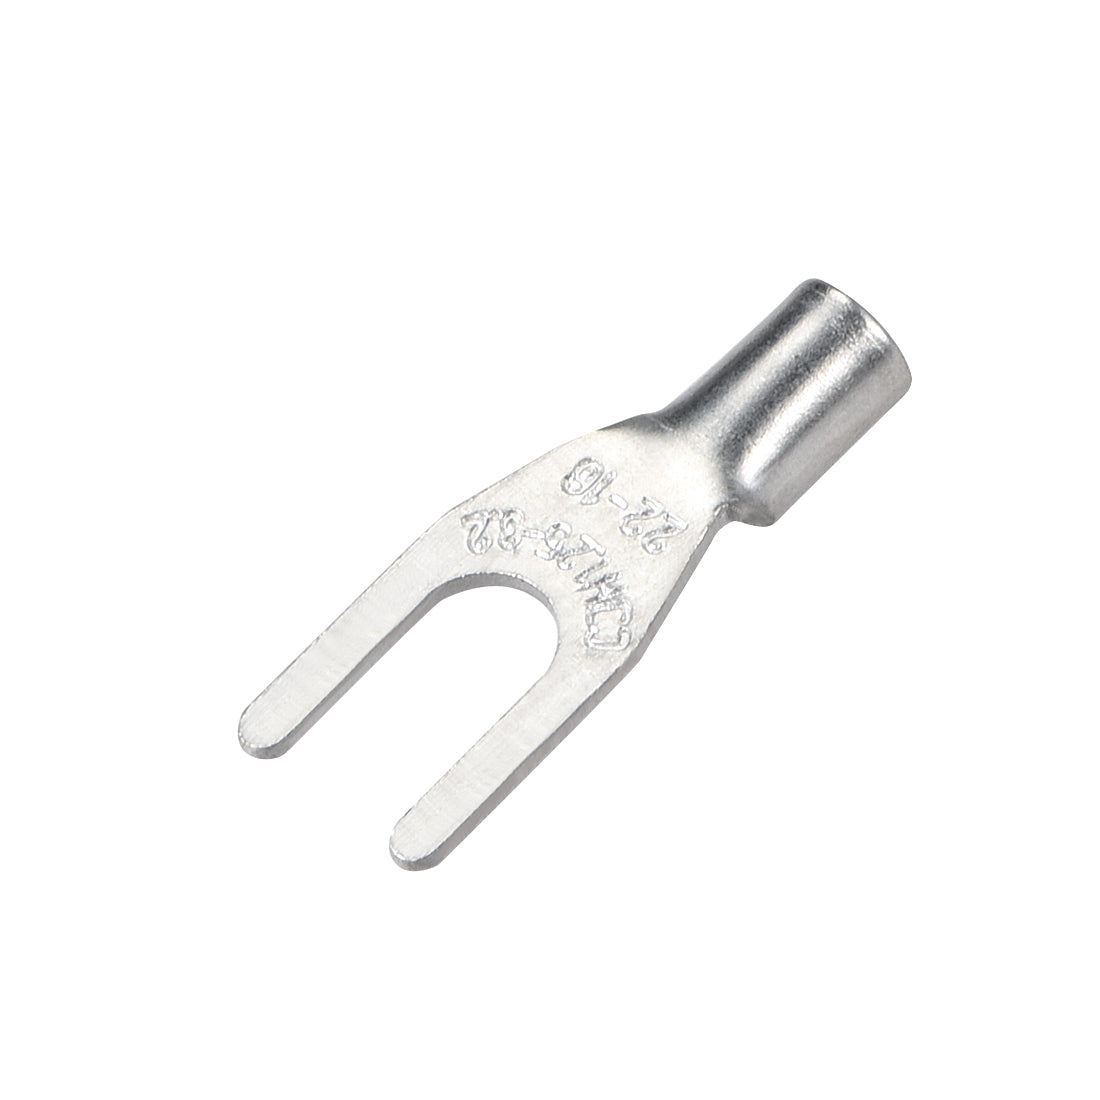 uxcell Uxcell 10Pcs SNB1.25-3.2 Non-Insulated U-Type Brass Crimp Terminals AWG22-16 Wire Connector Silver Tone